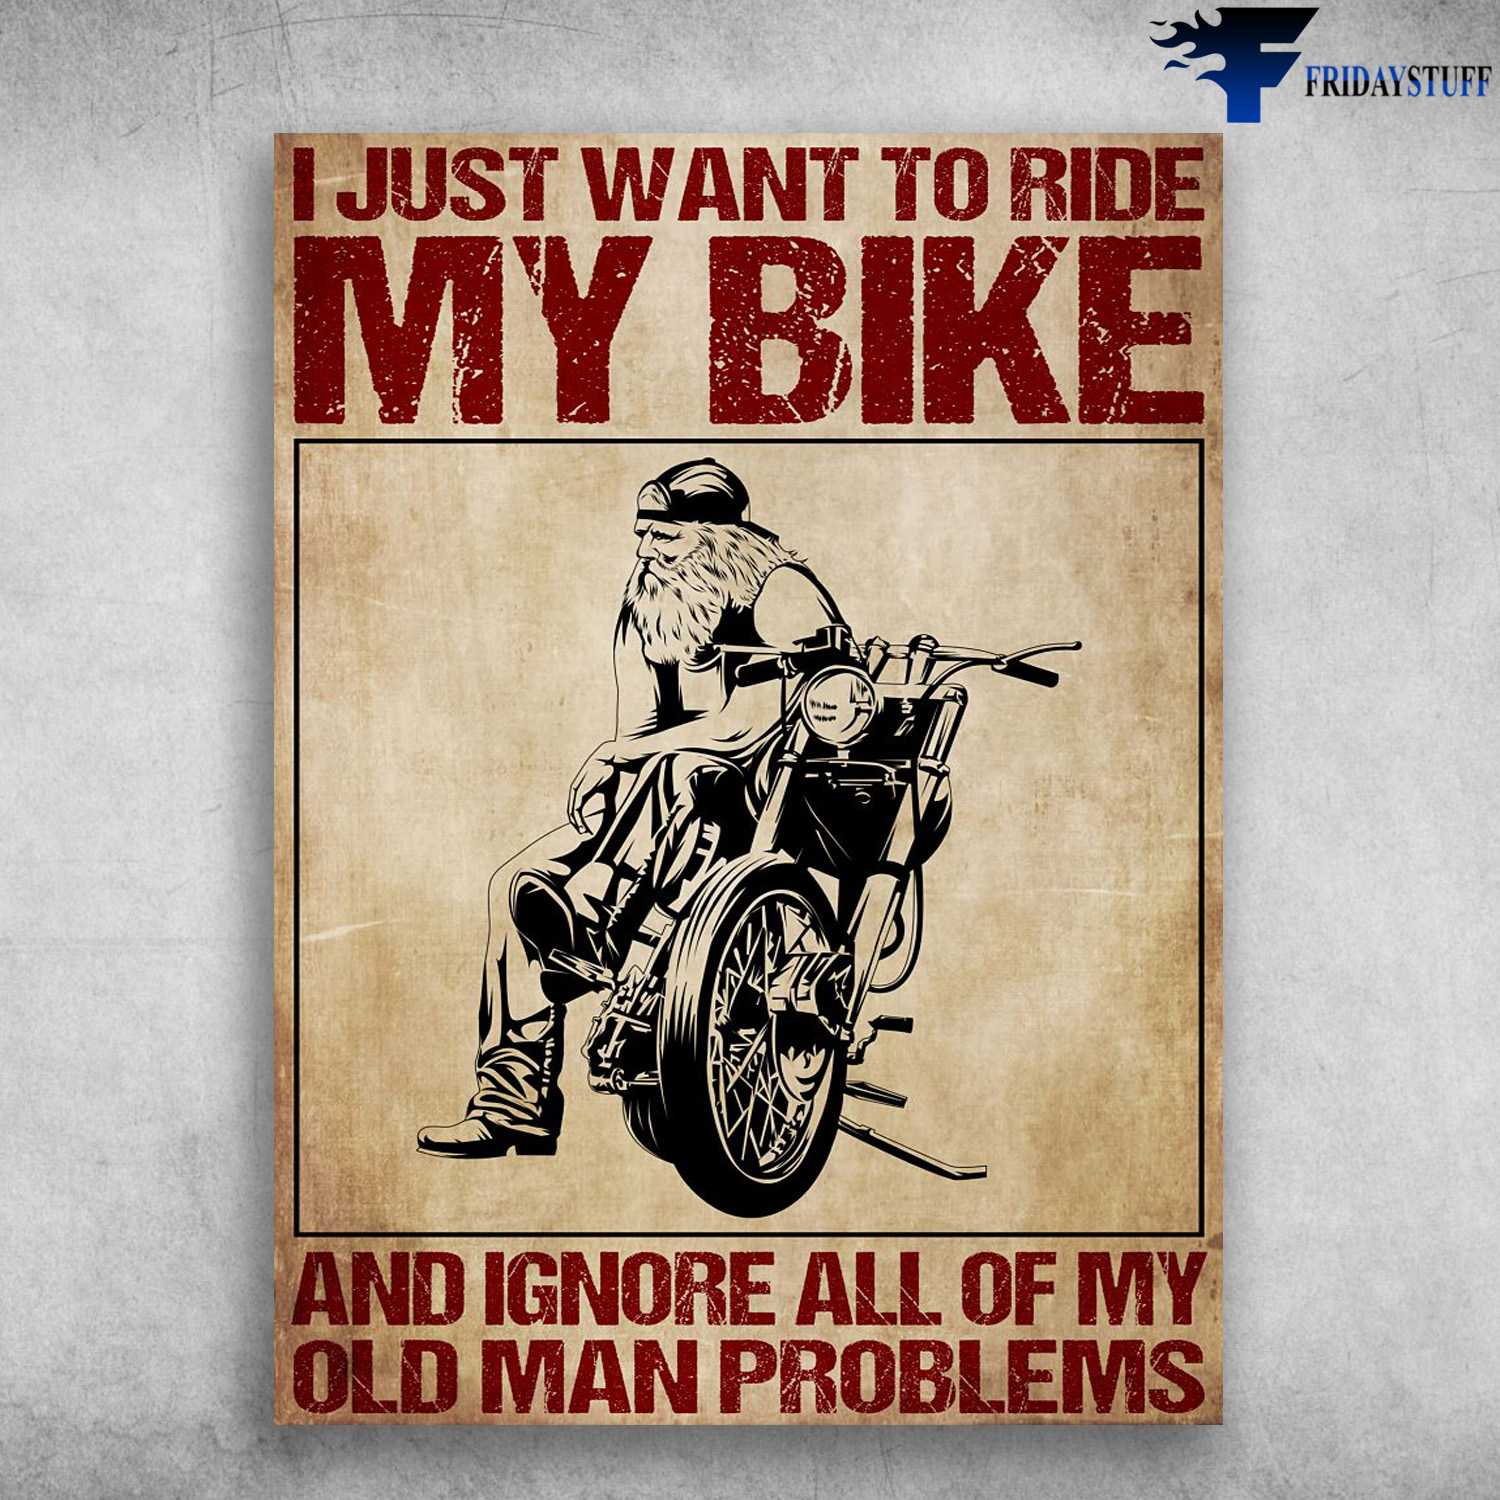 Old Biker, Old Man Motorbike, I Just Want To Ride My Bike, And Ignore All Of My, Old Man Problem